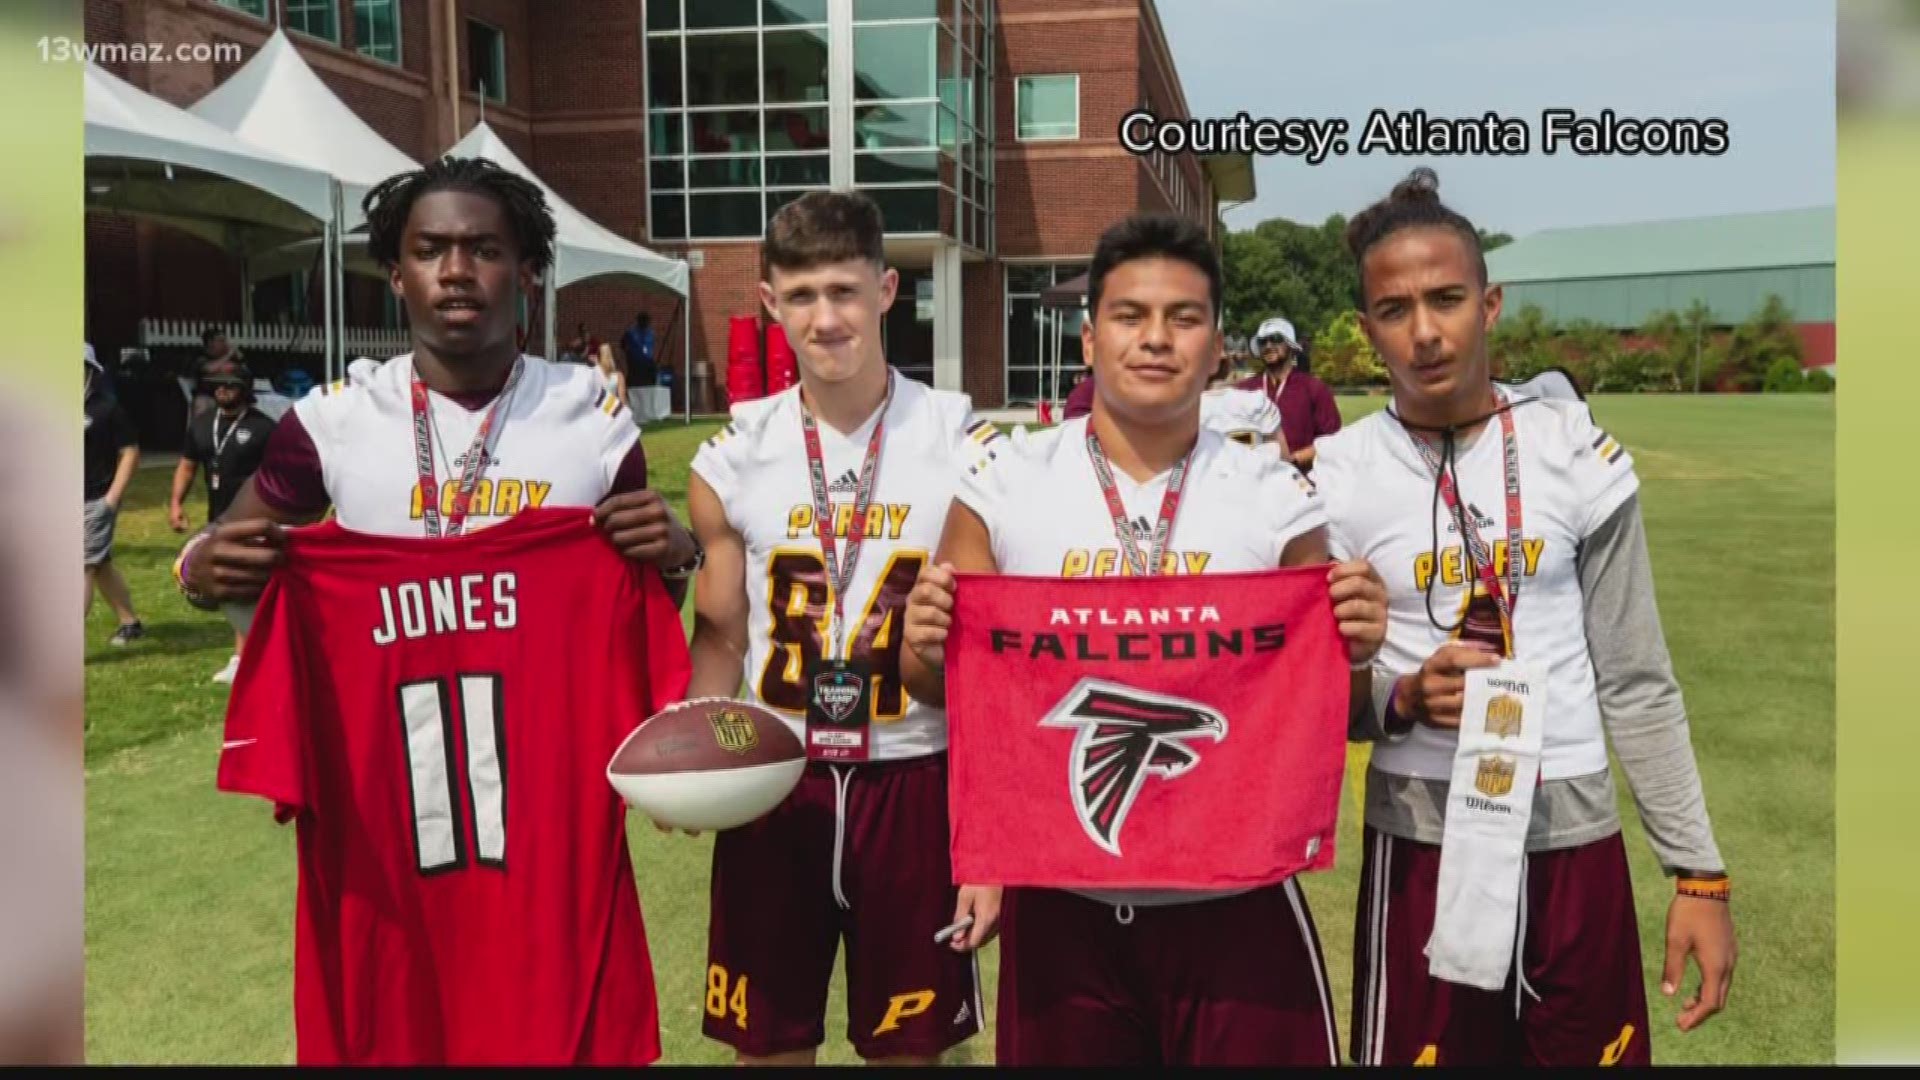 The Perry Panthers football team had the opportunity to visit the Atlanta Falcons in Flowery Branch over the weekend.